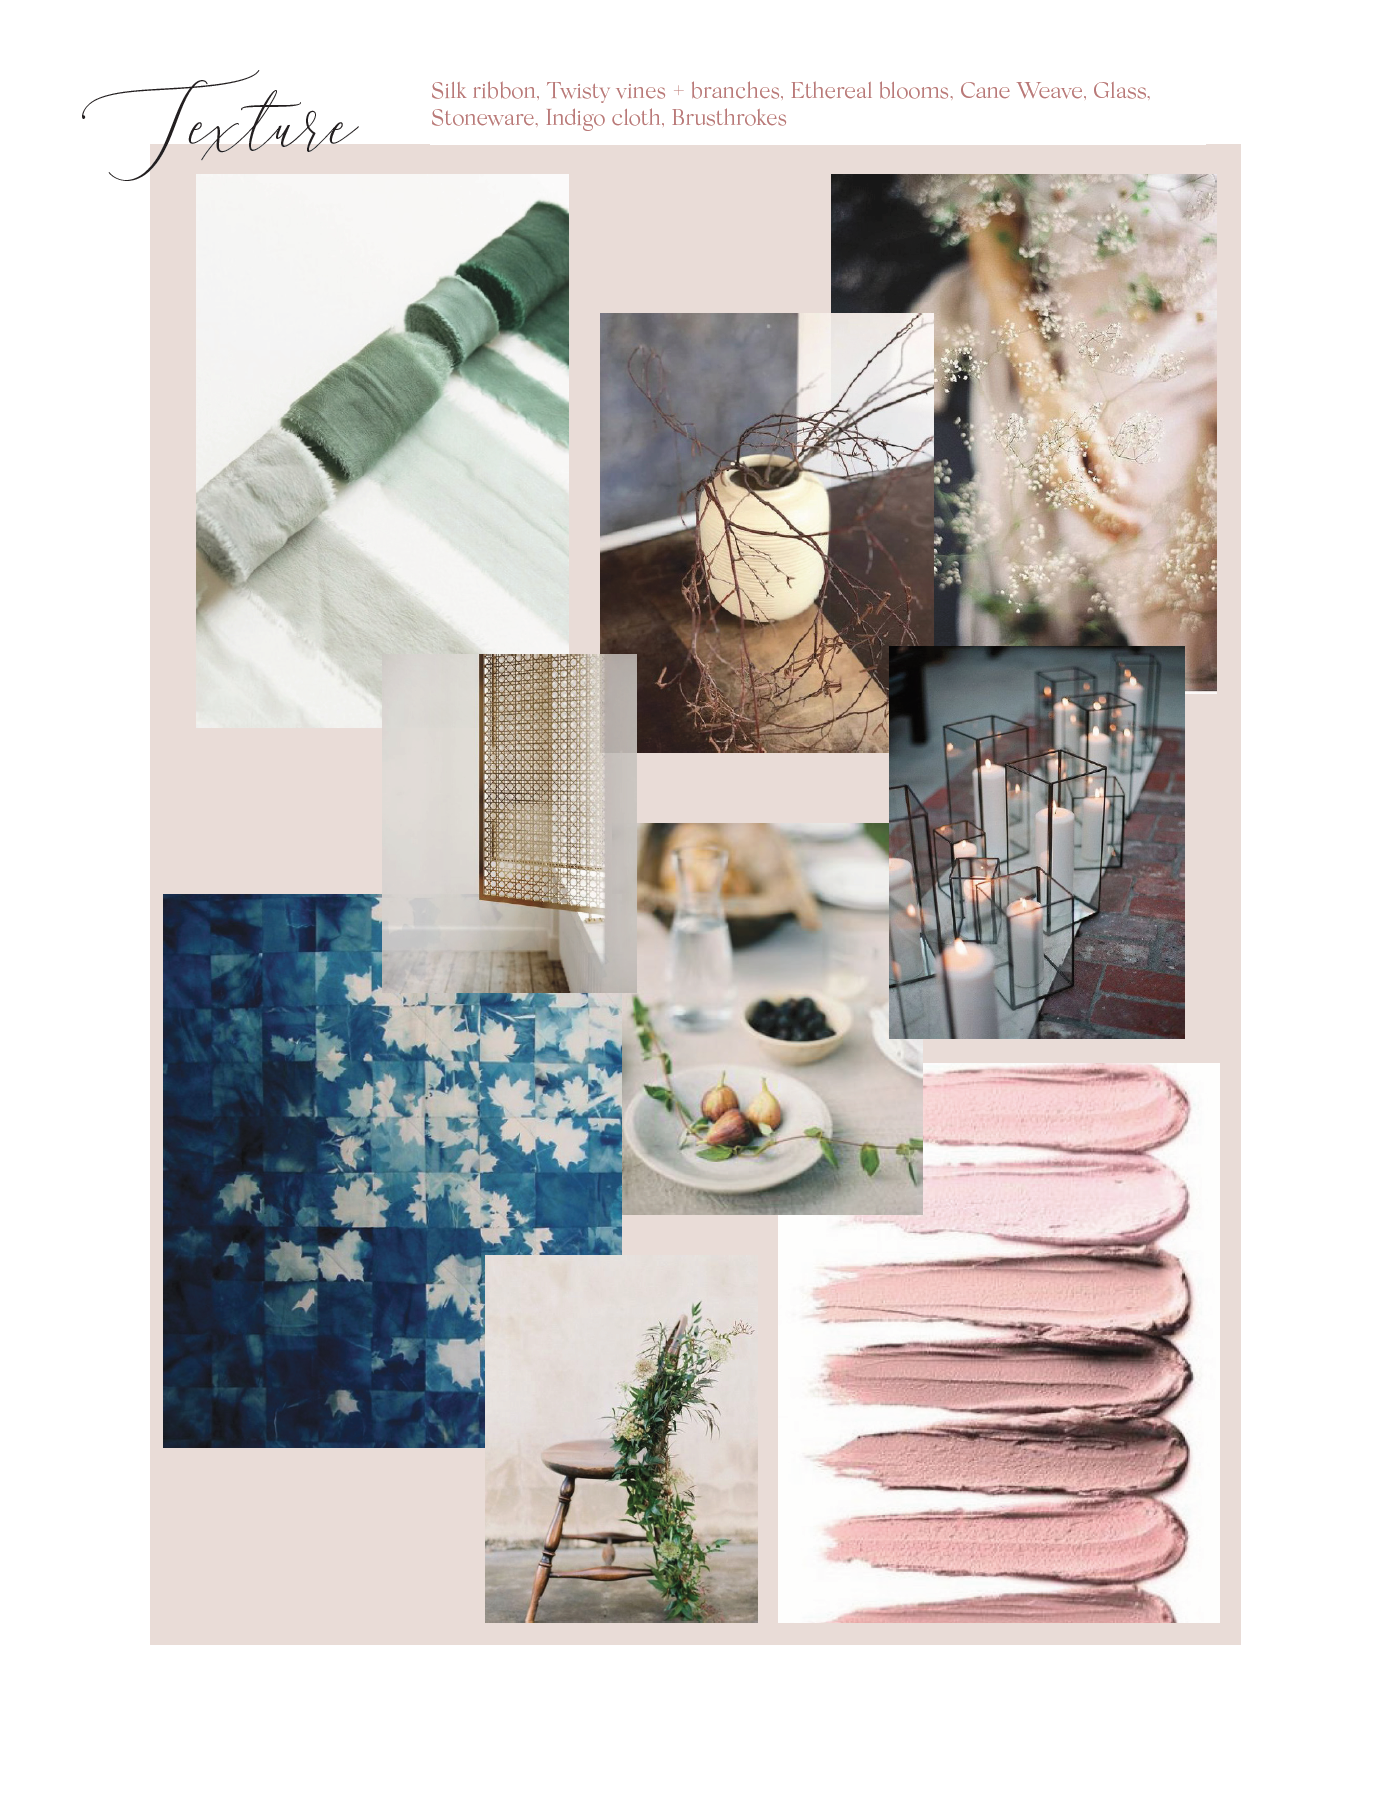 Charleston garden wedding texture inspiration with silk, wood, cane weave, stoneware, cloth and paint